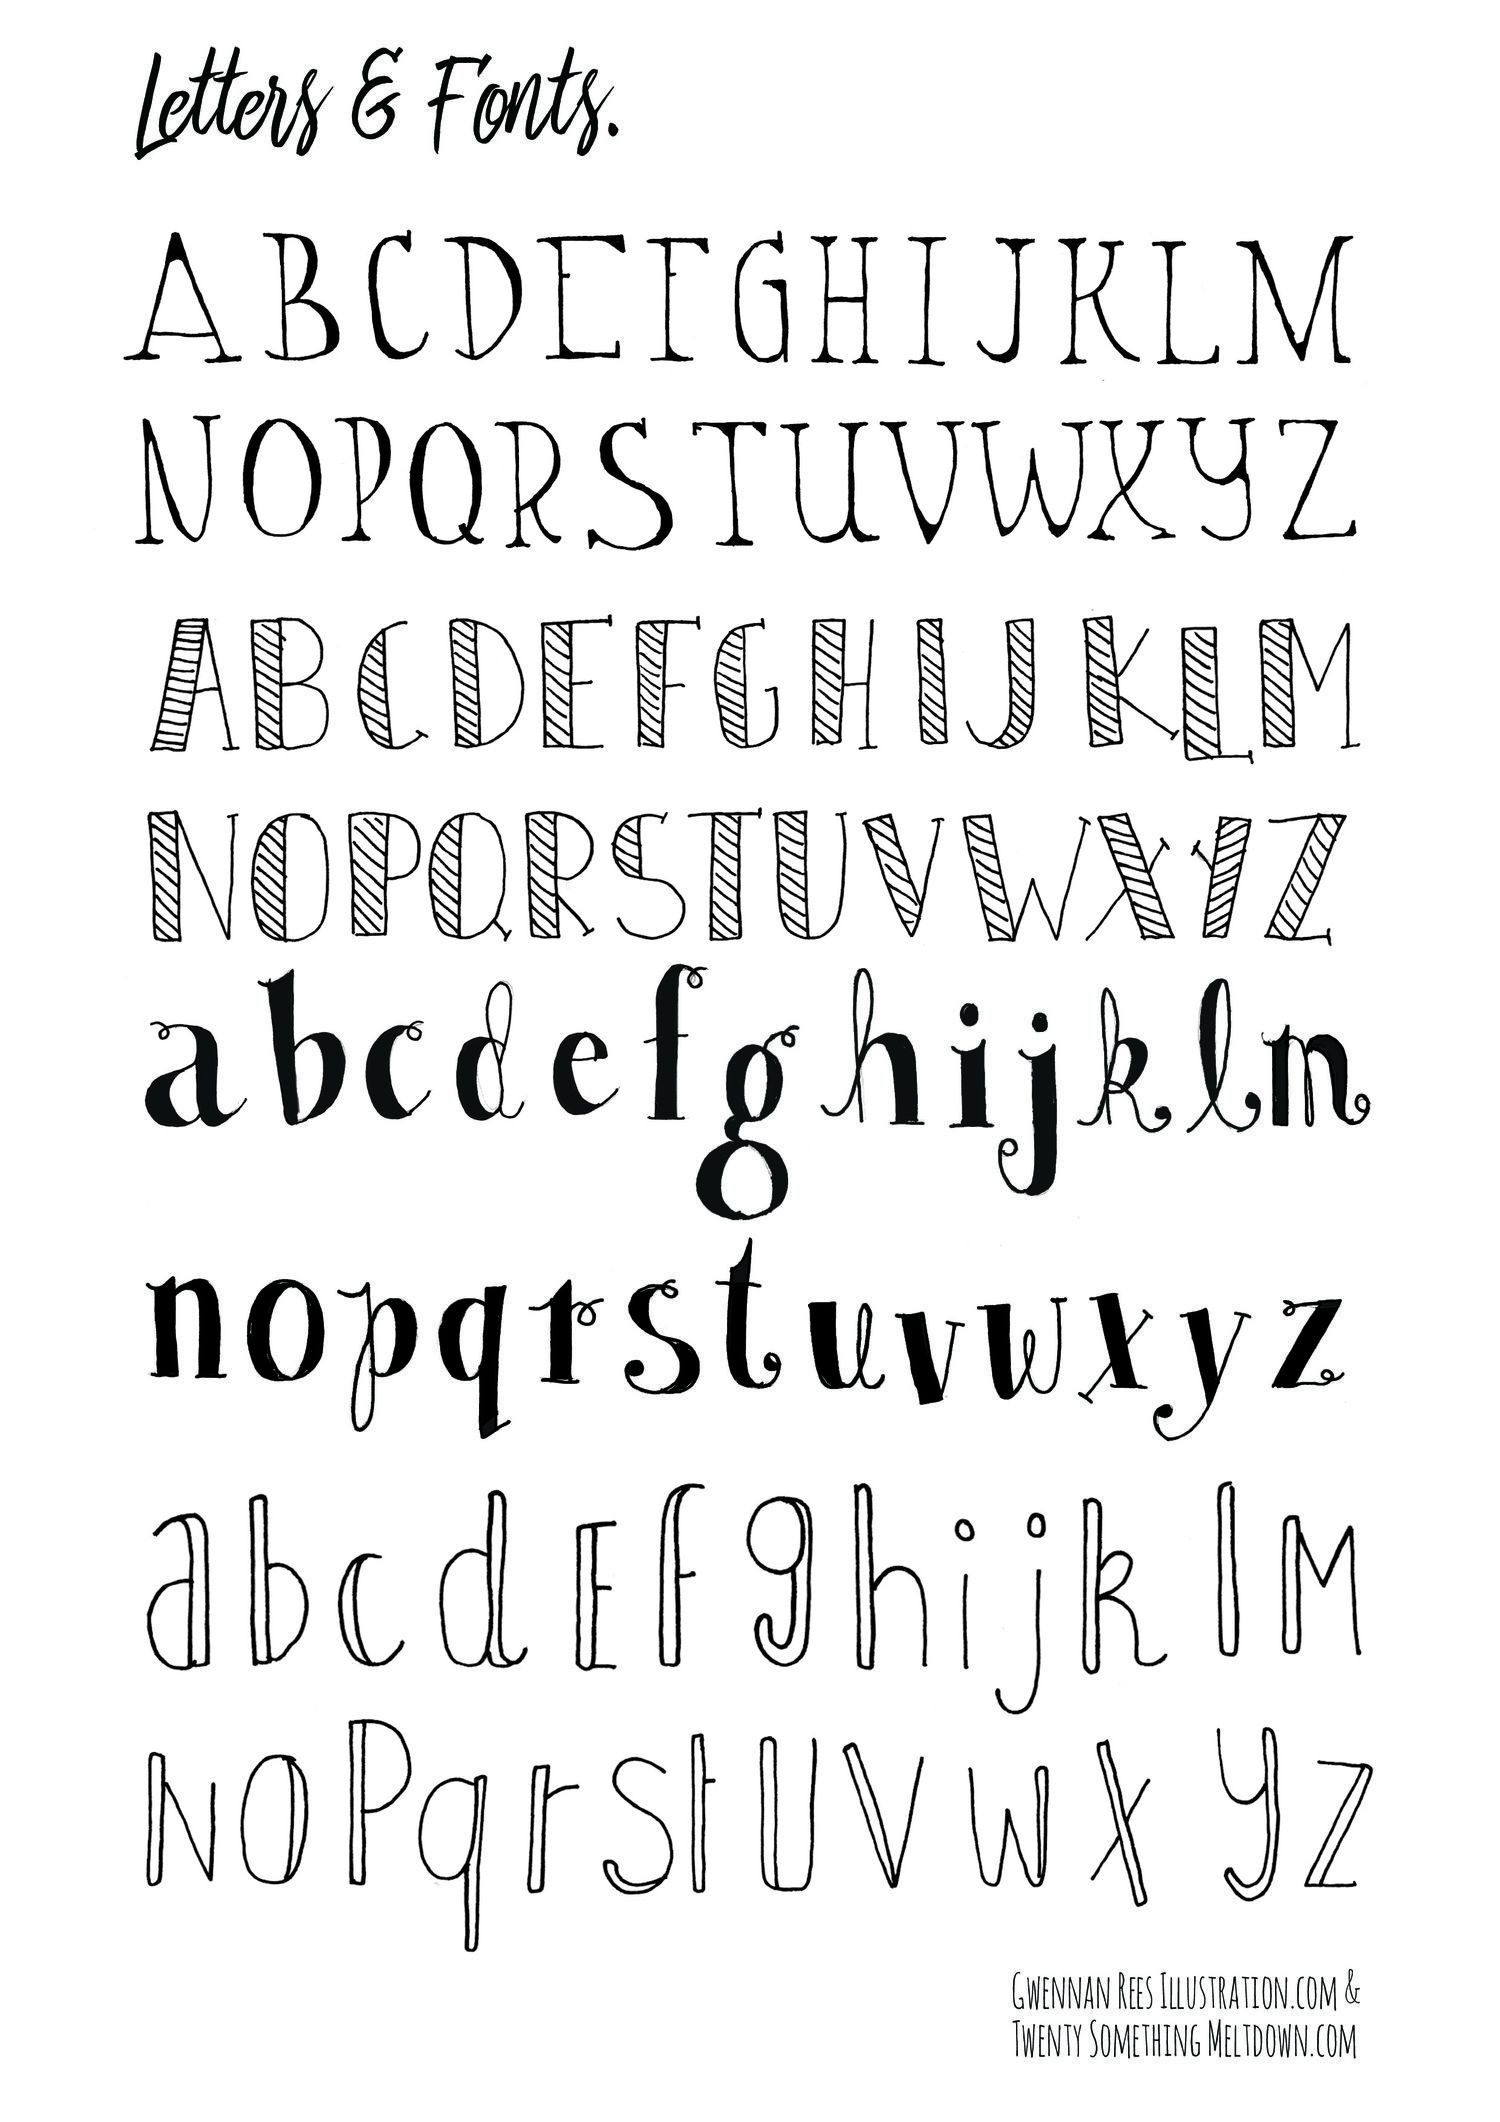 CLICK TO DOWNLOAD LETTERS AND FONTS PAGE 1.